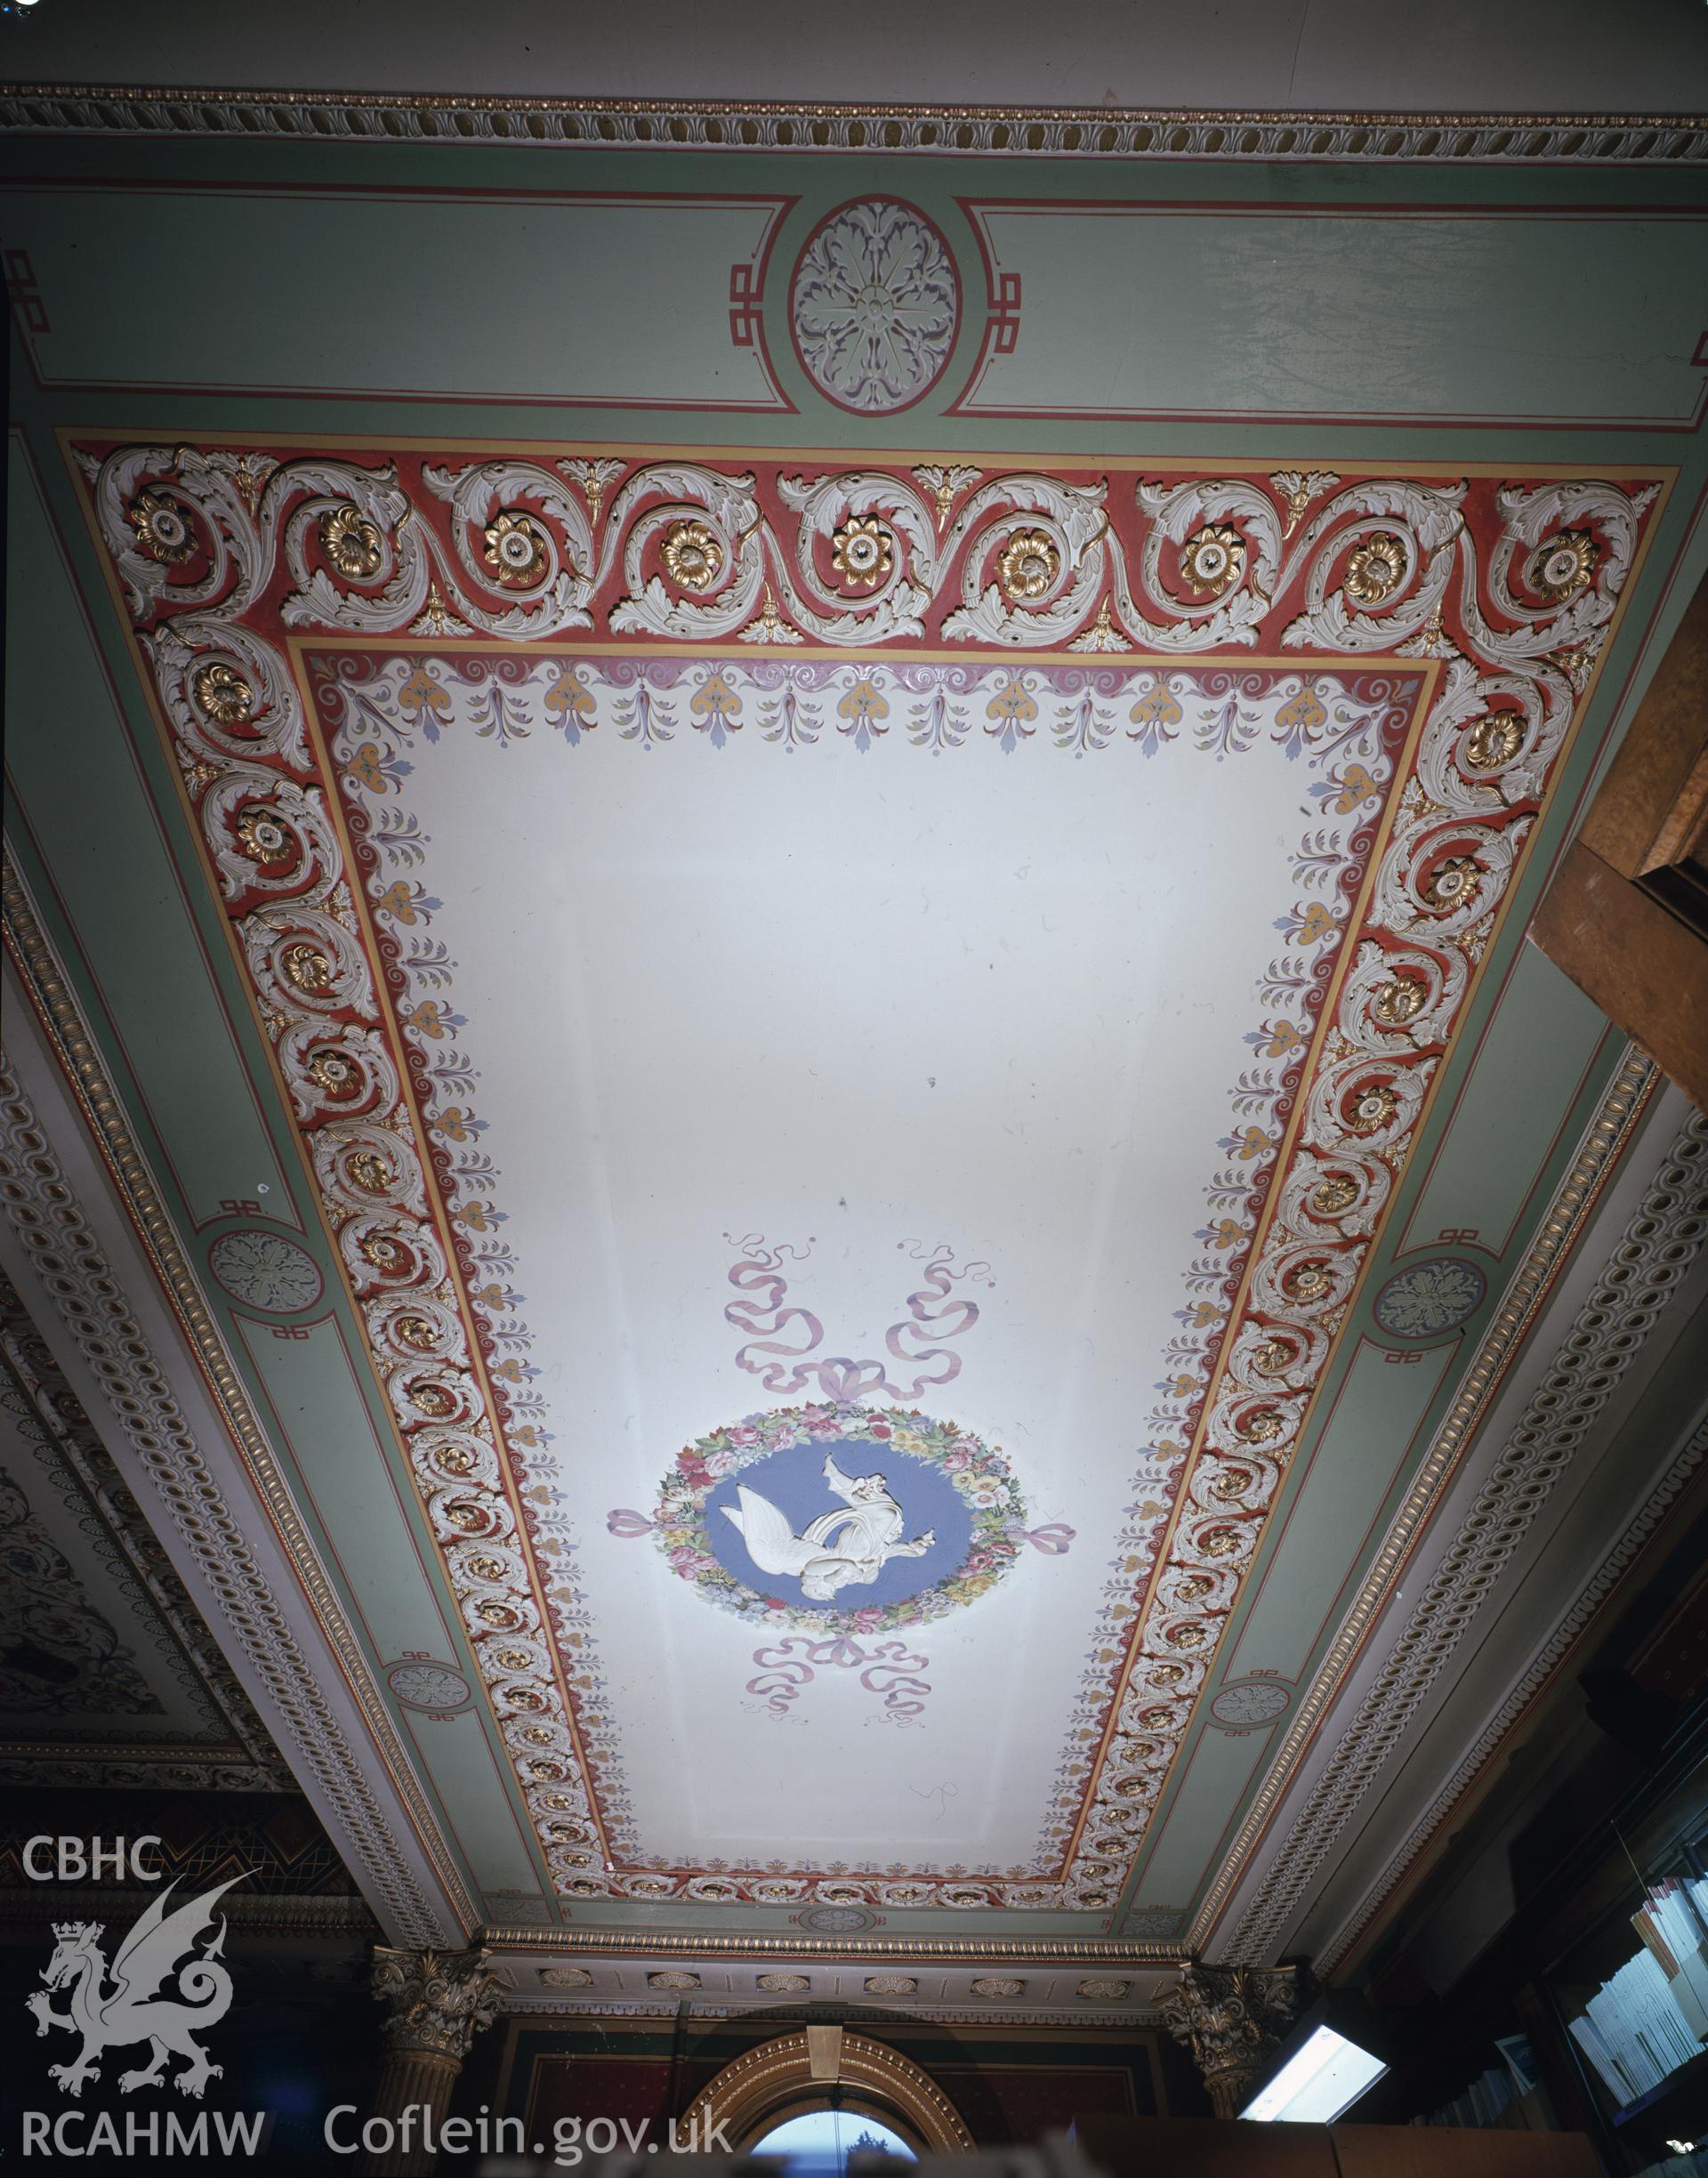 Colour image showing the library ceiling at Trawscoed.